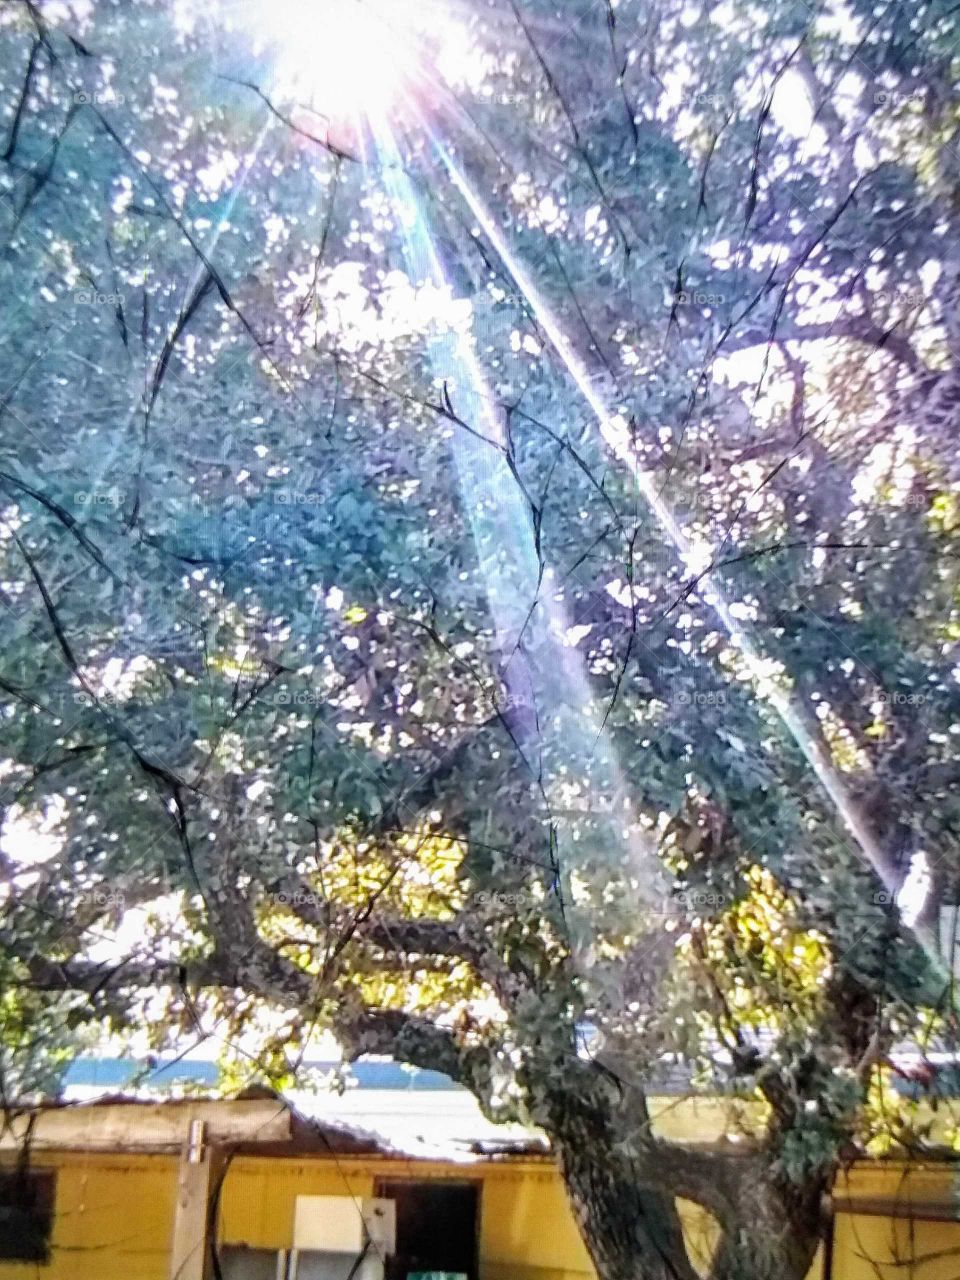 beautiful early morning sunset in Texas shining through the tree